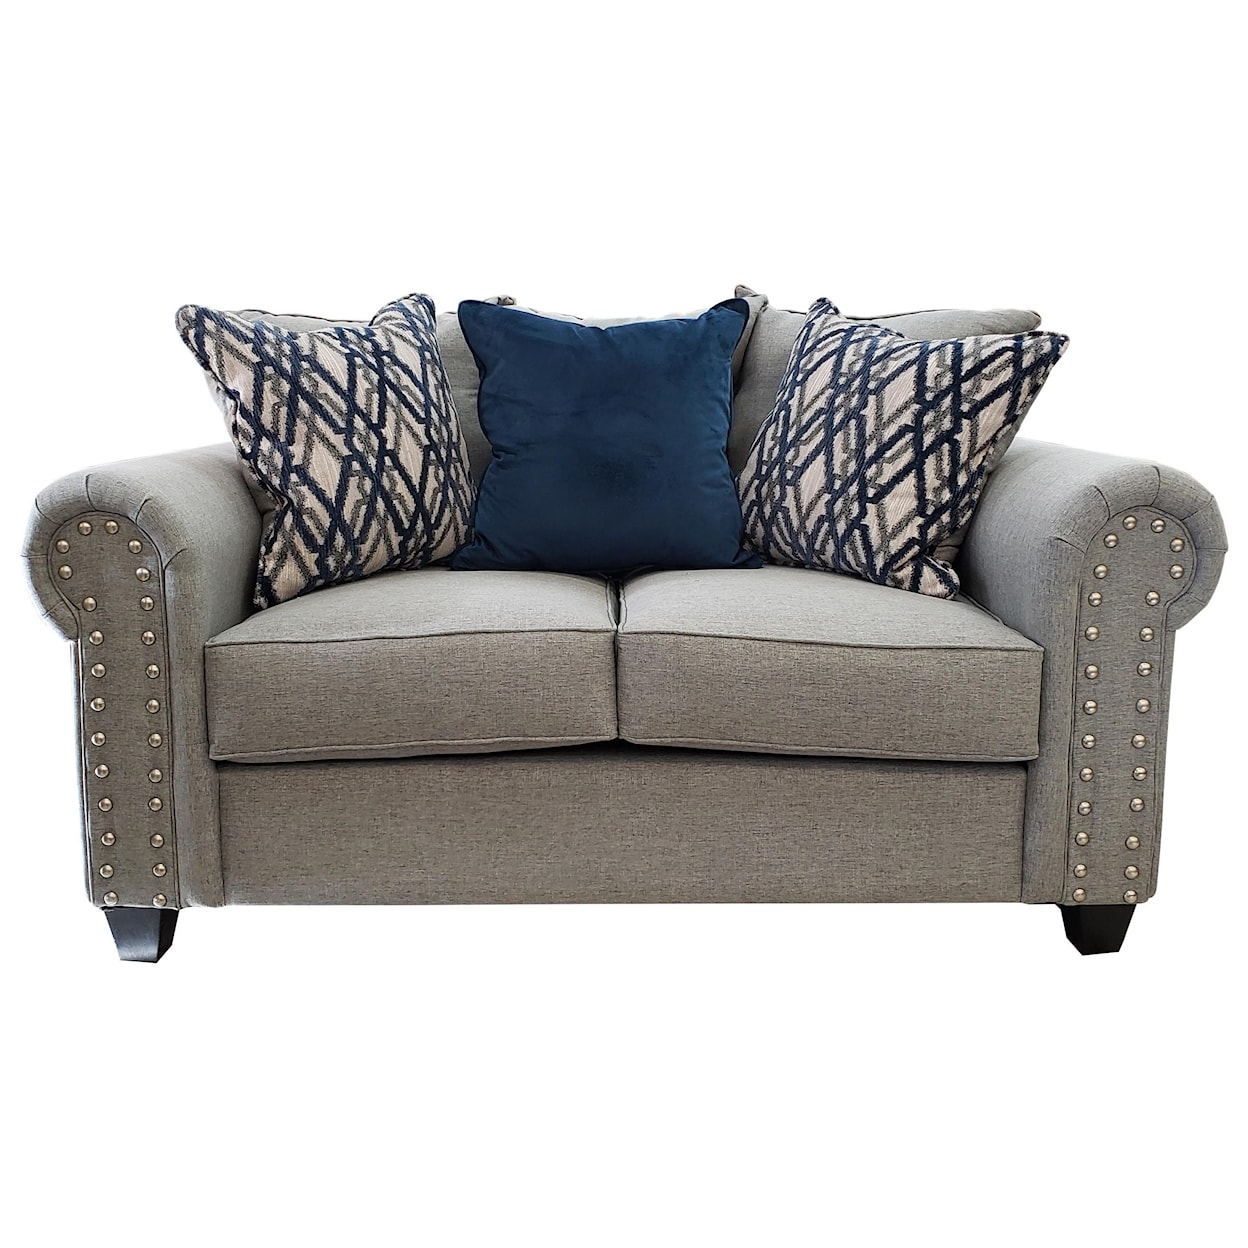 Exclusive JAGGER Love Seat